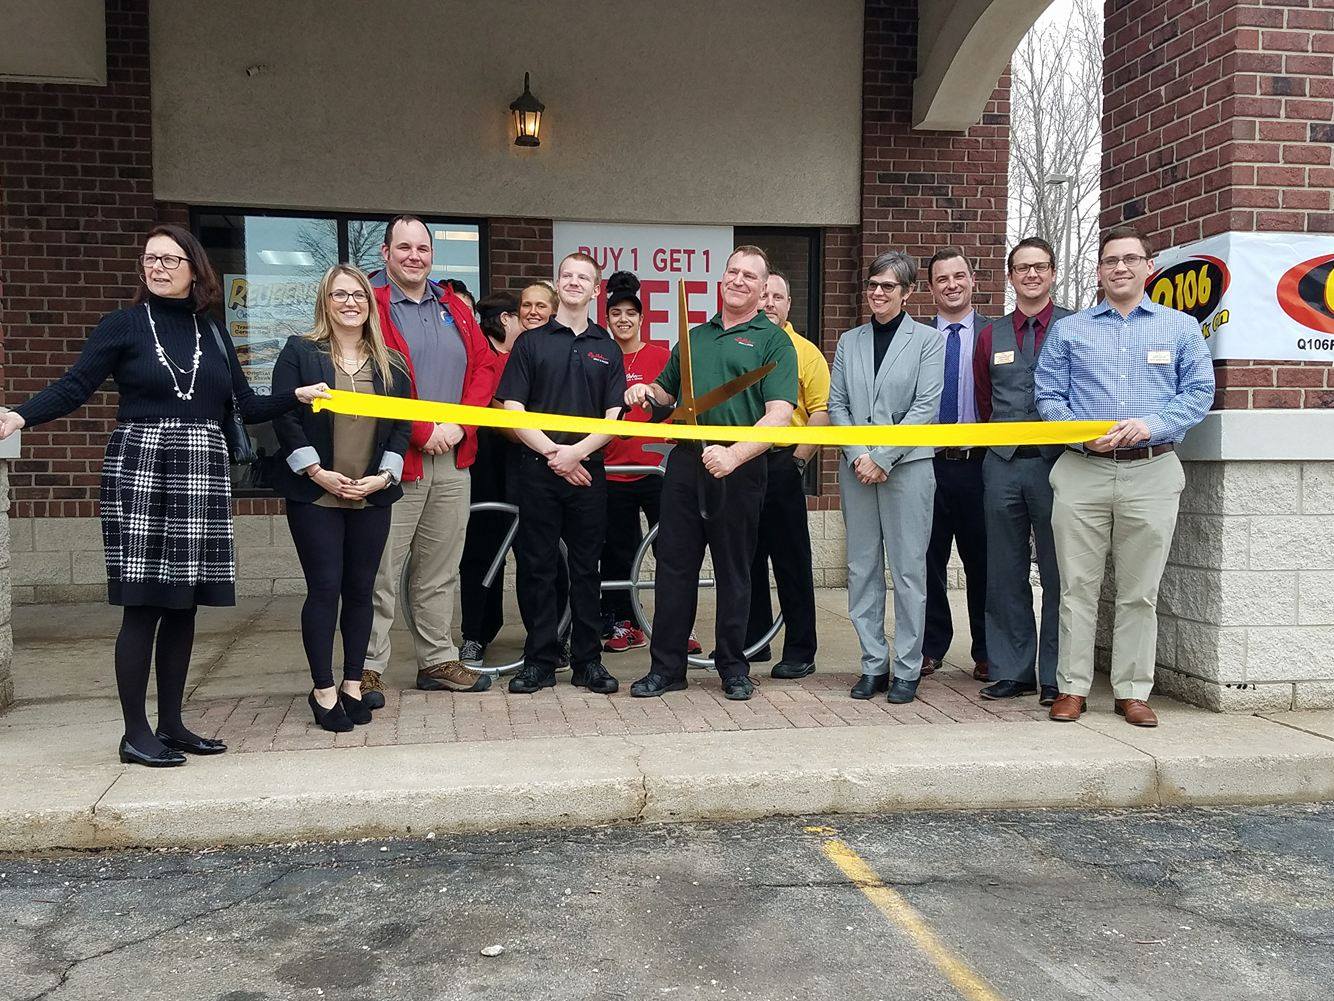 Two Local Businesses Have Grand Opening At New Location